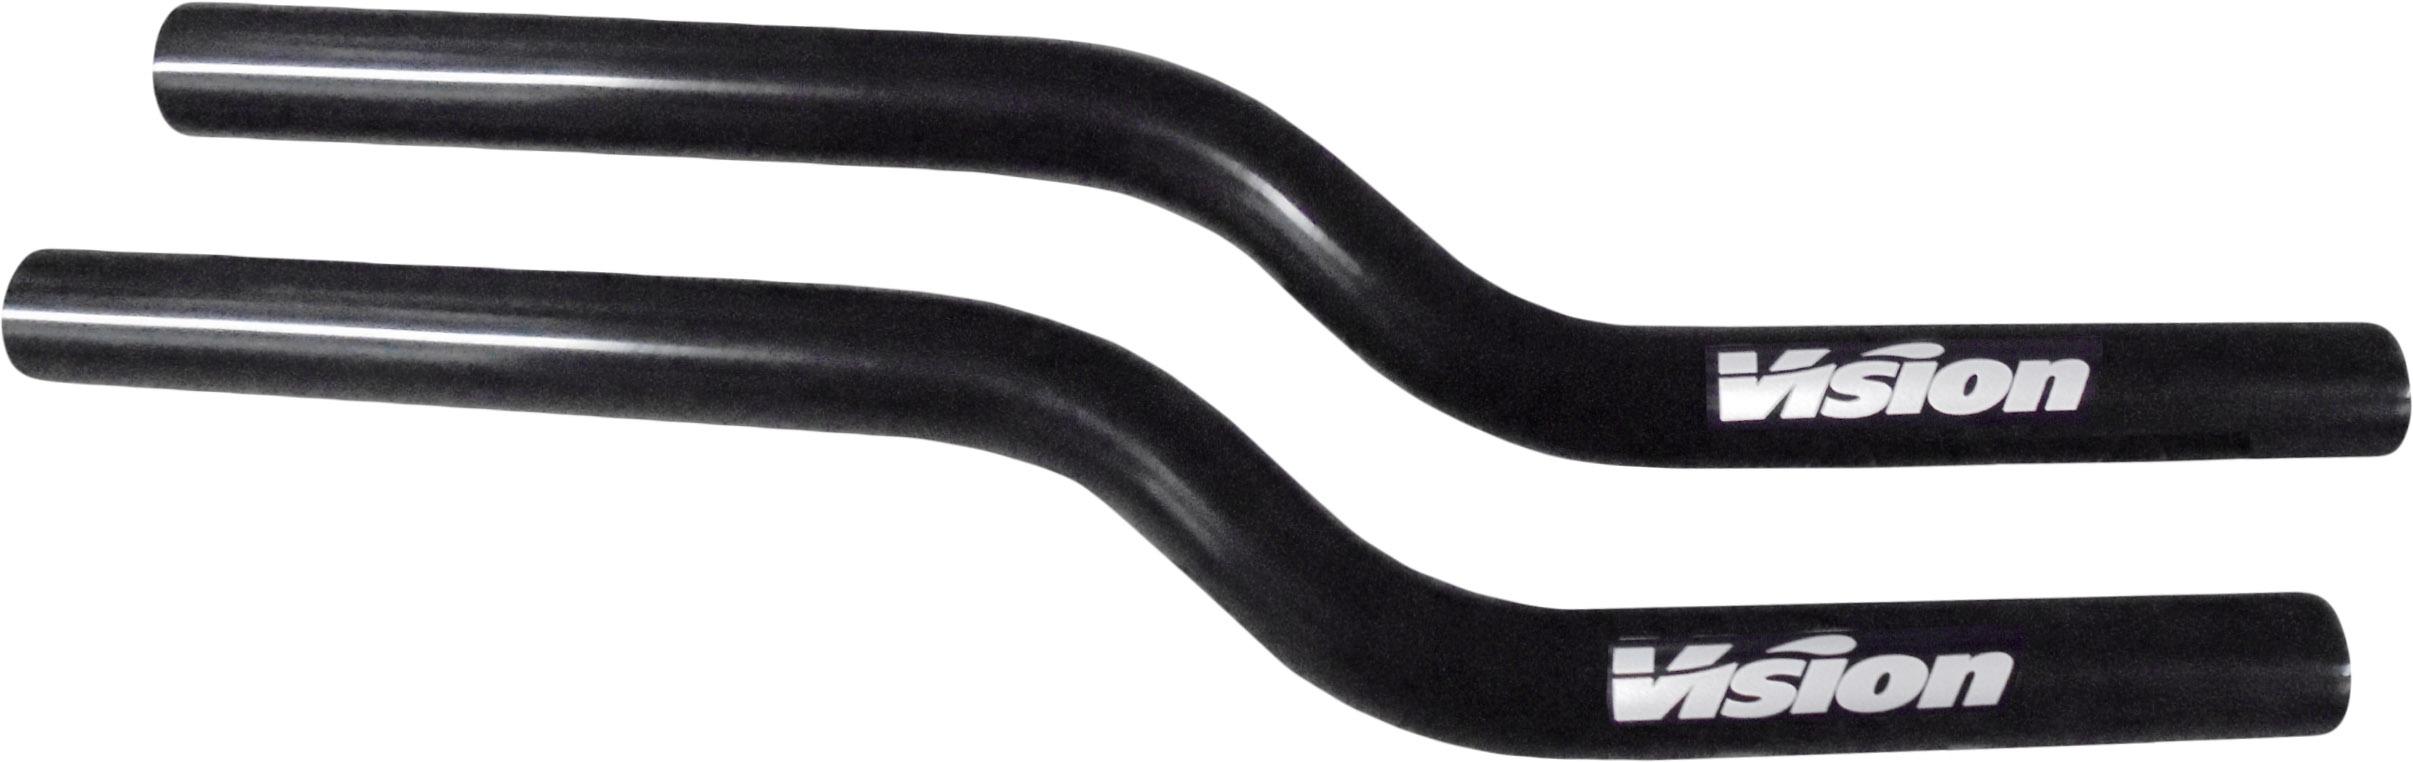 Vision R-bend Alloy Extensions - Black